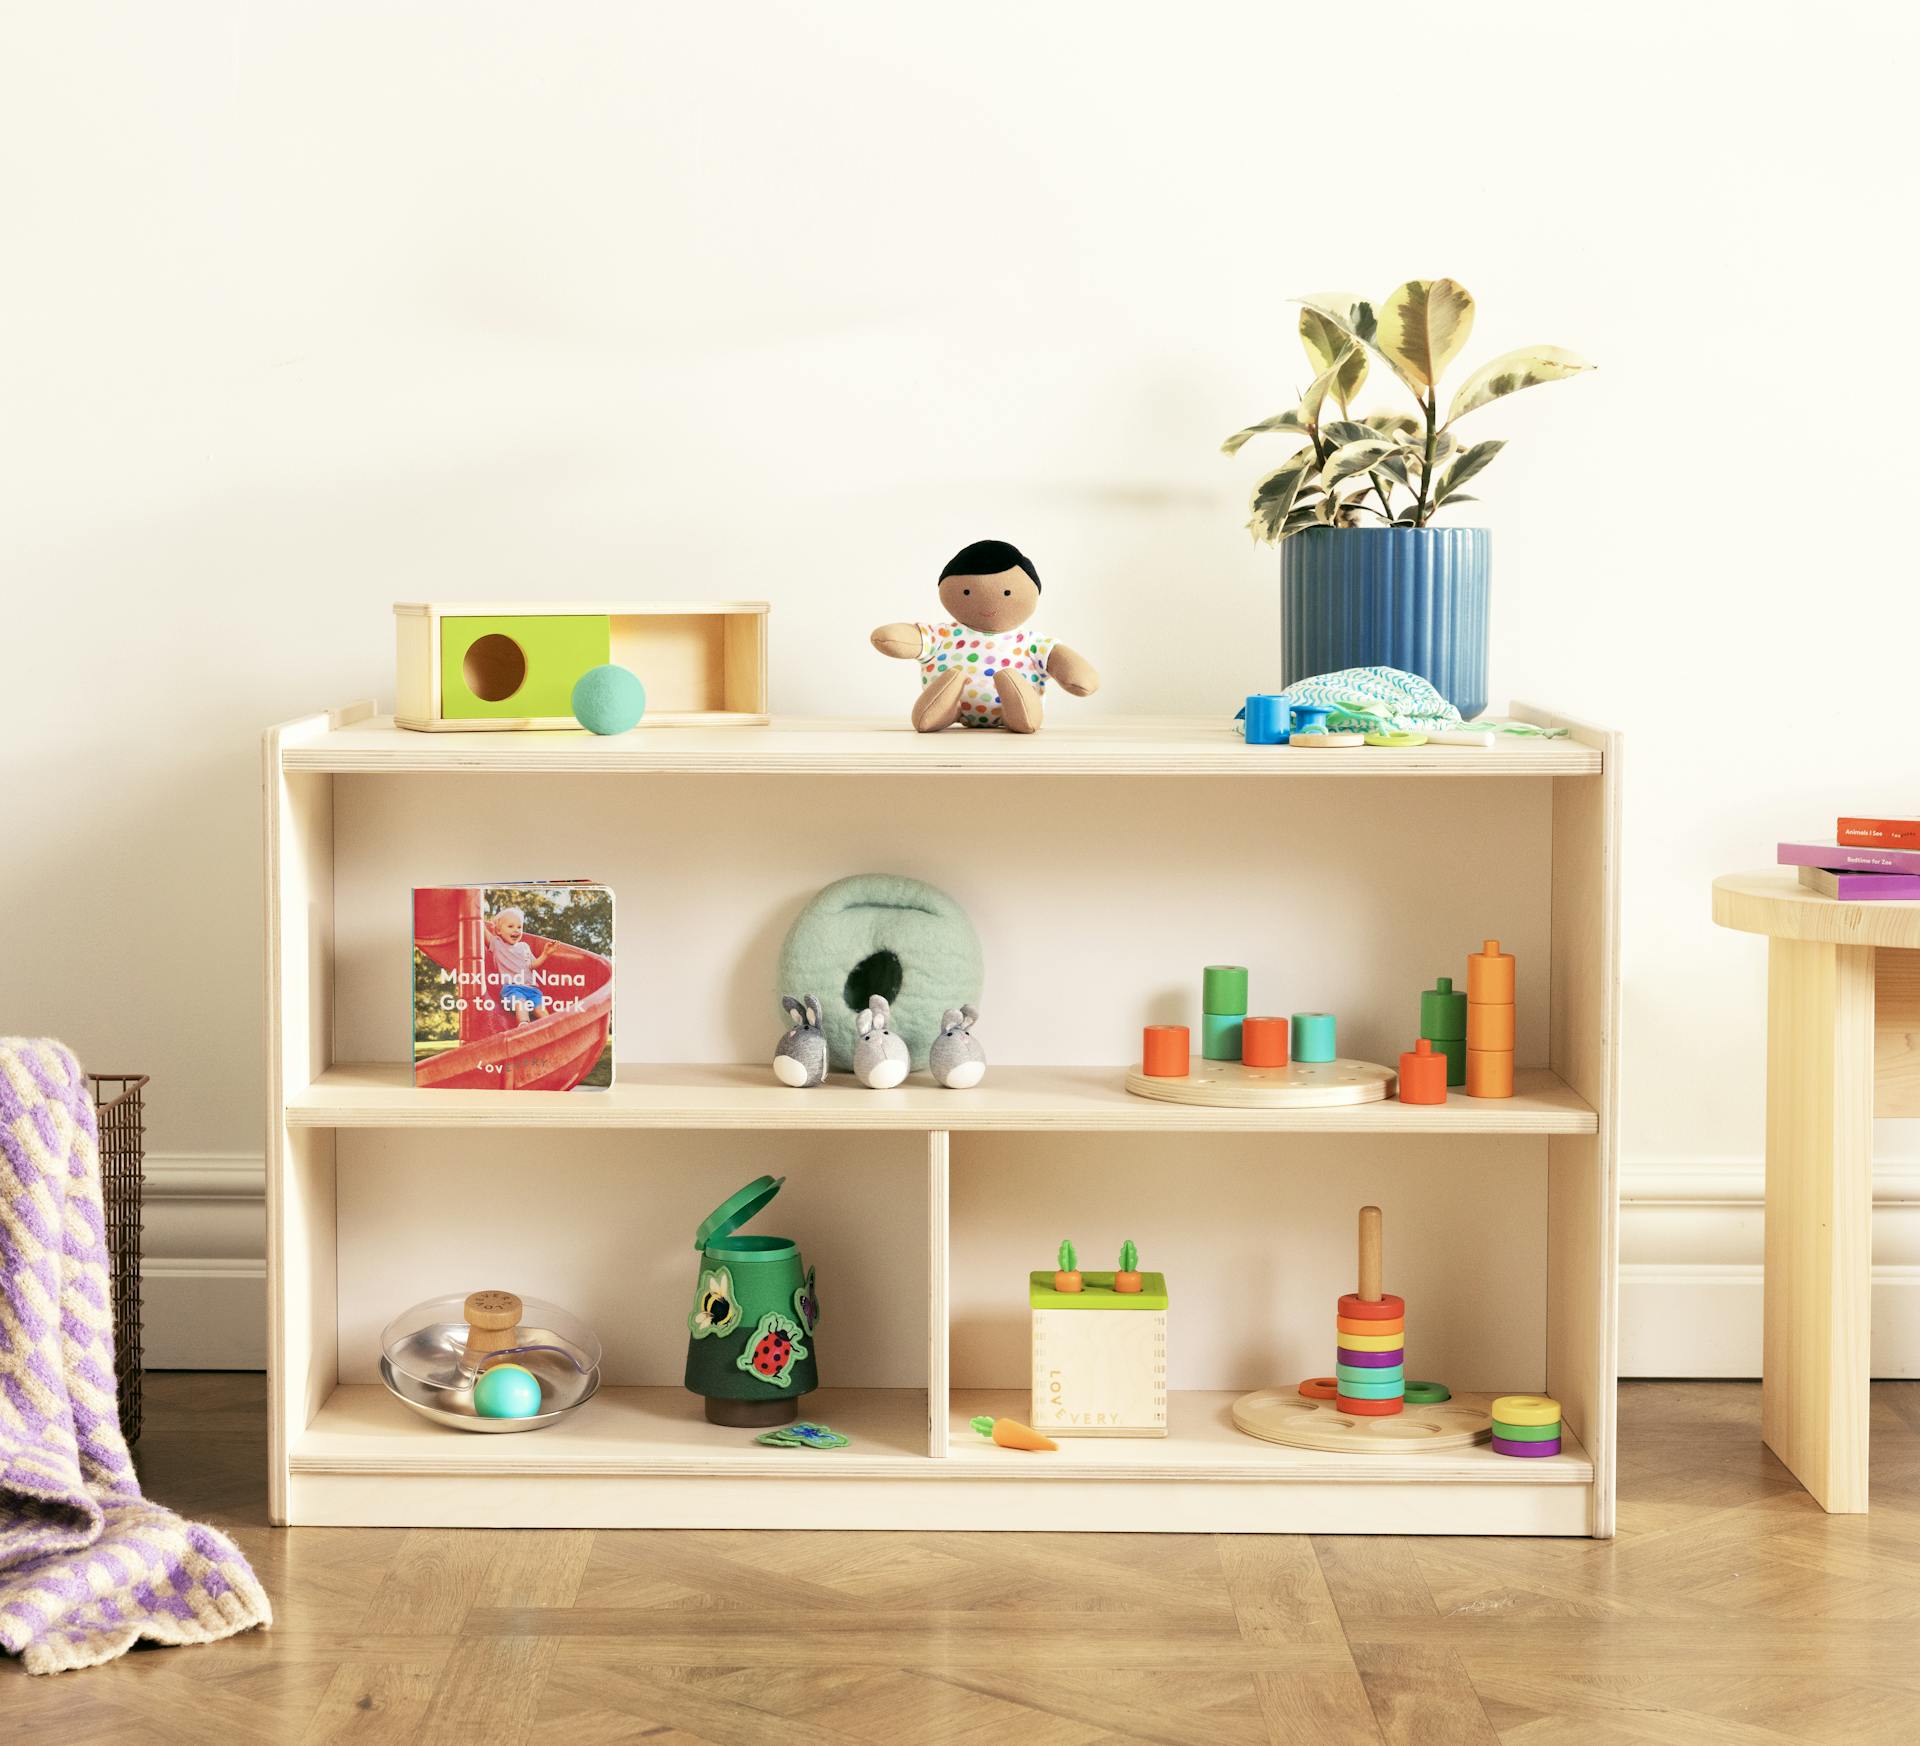 The Montessori Playshelf filled with playthings from Lovevery